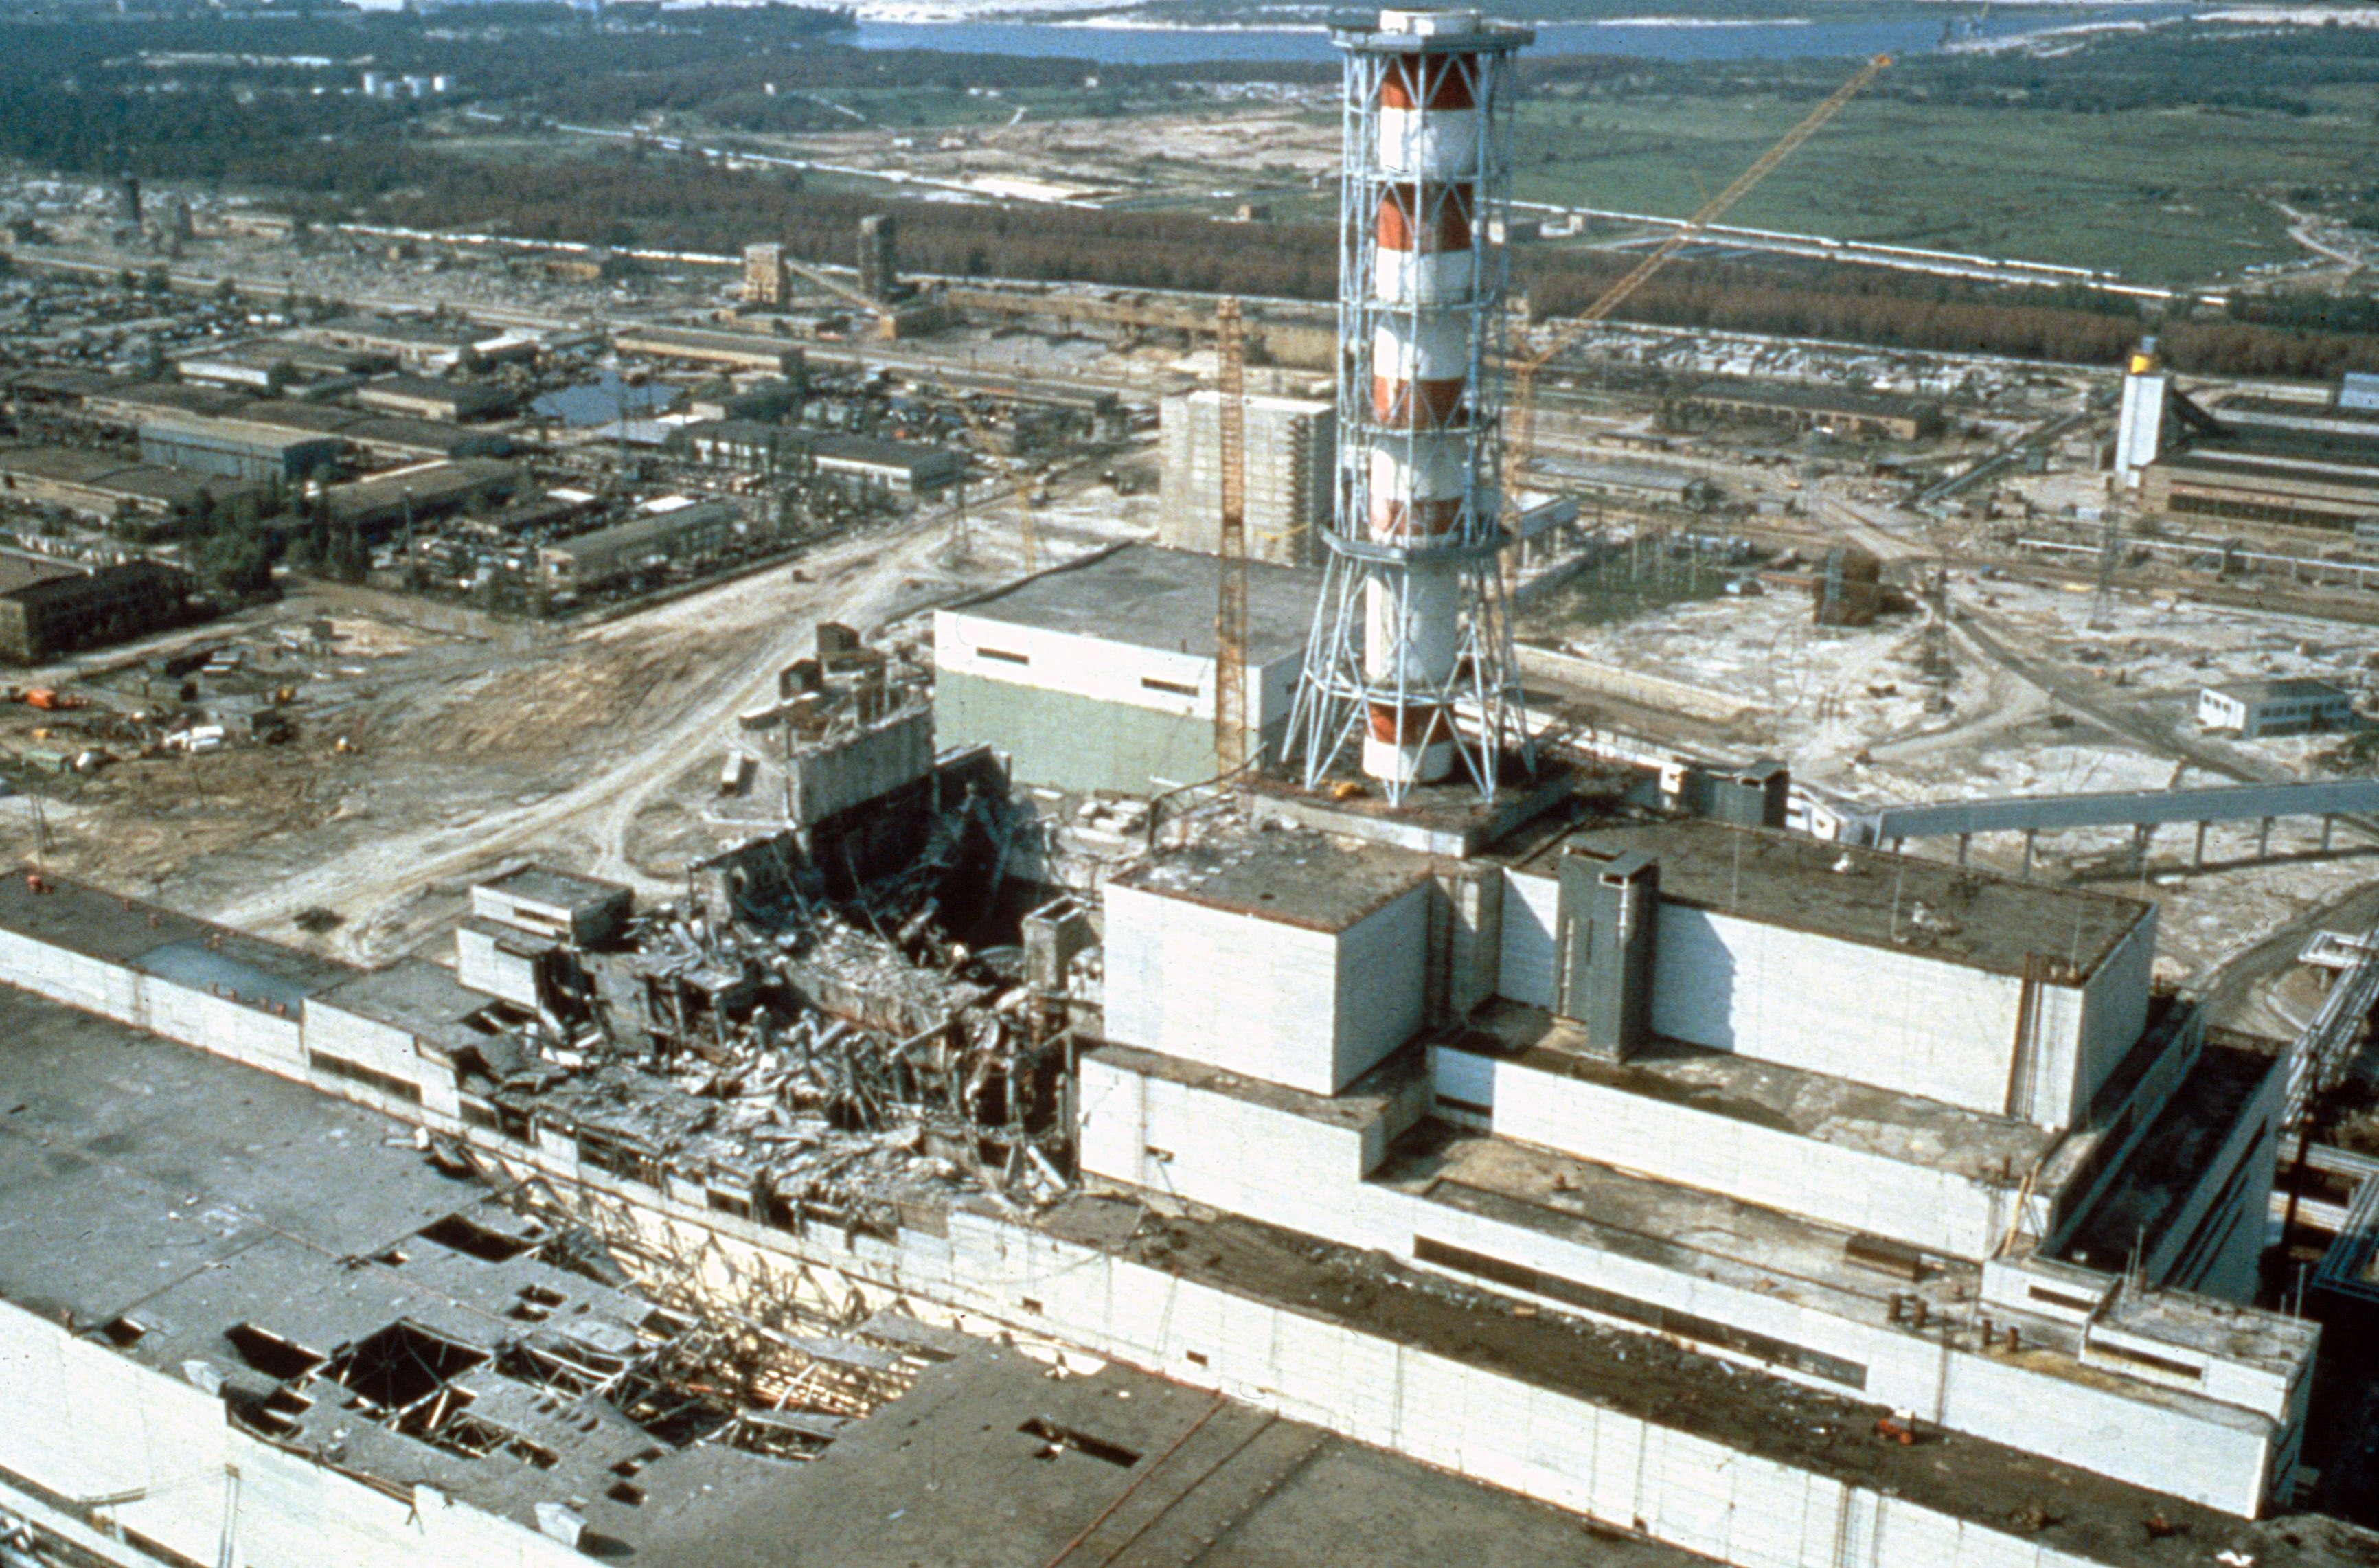 chernobyl-nuclear-power-plant-a-few-weeks-after-the-news-photo-629912323-1557104308.jpg